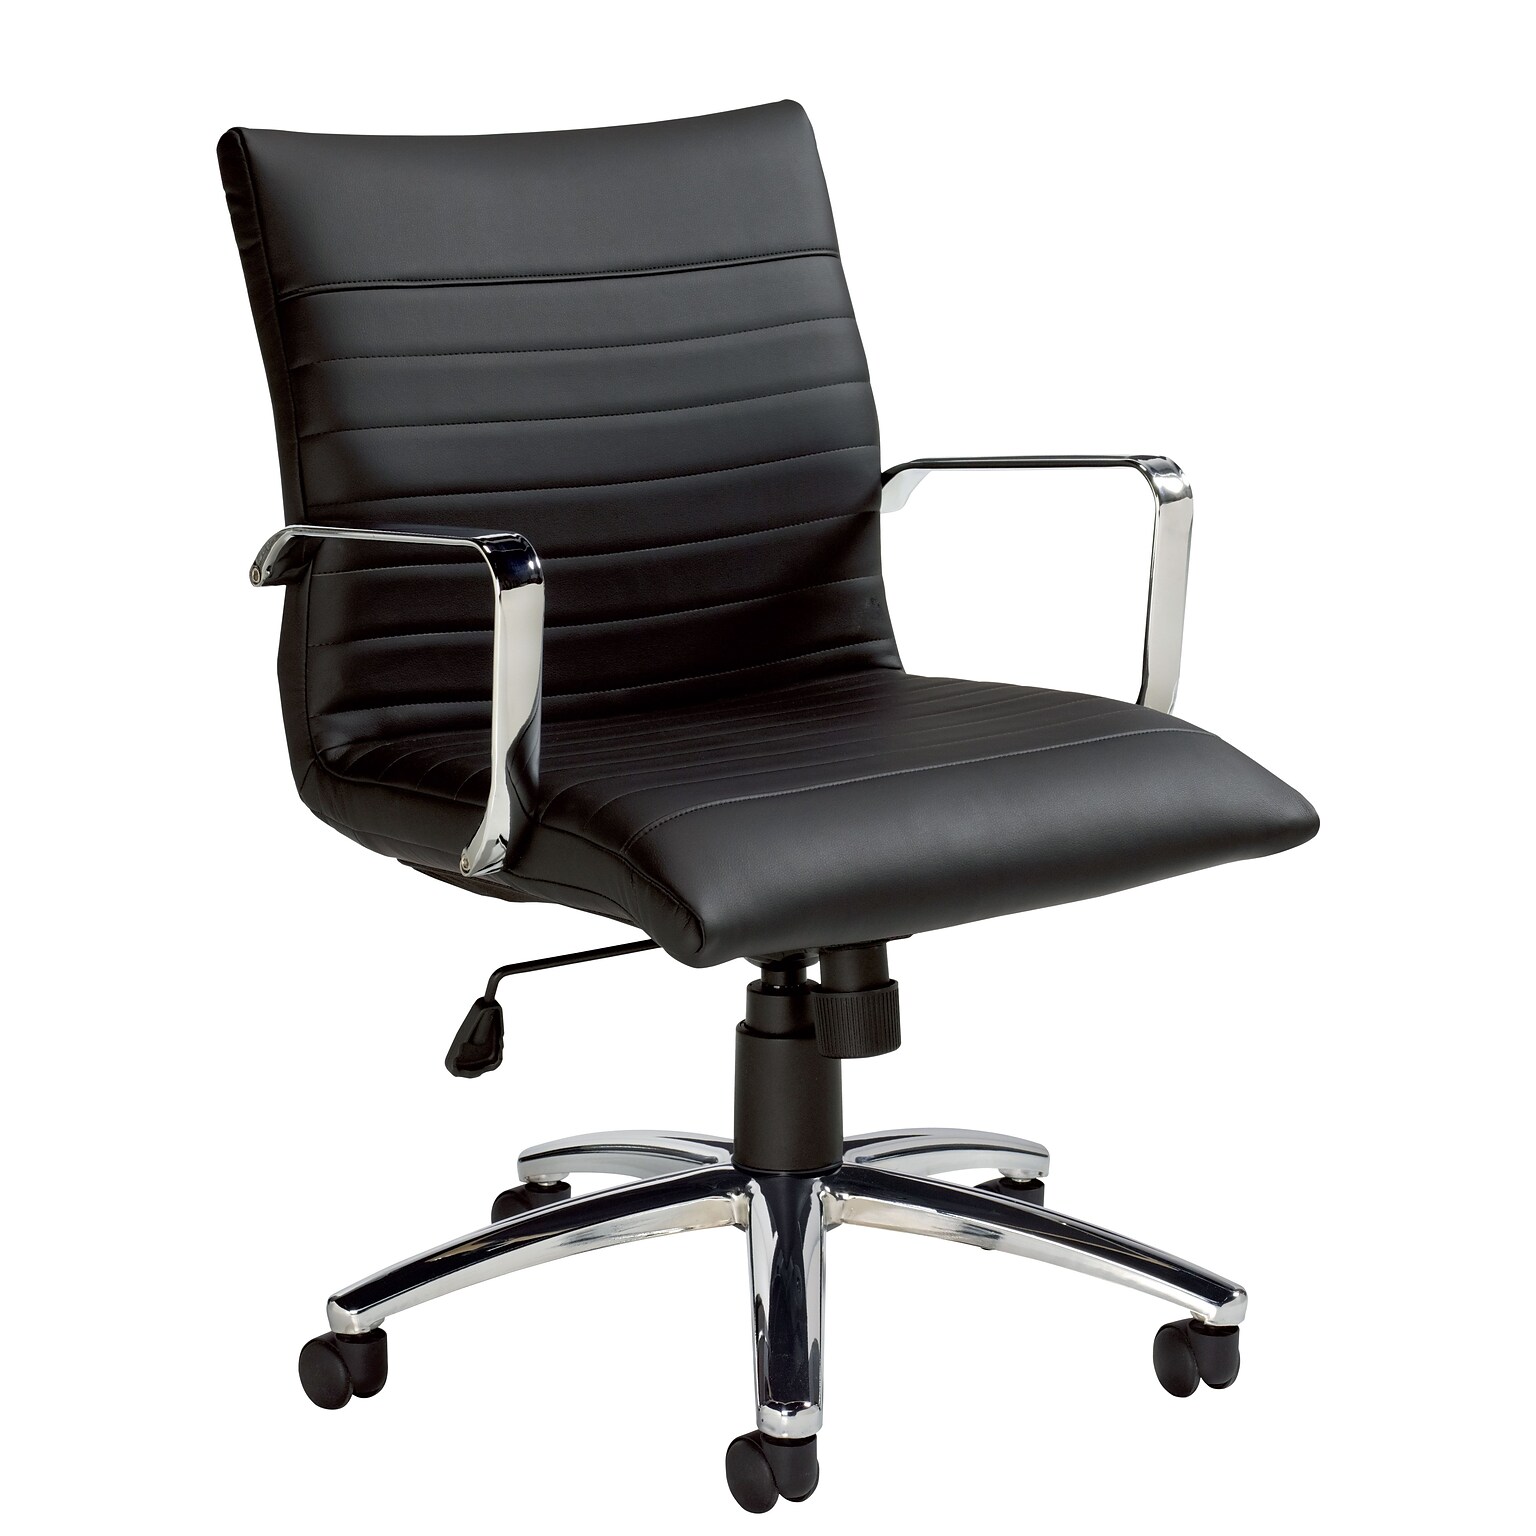 Offices To Go Mid Back Luxhide Executive Chair, Black (OTG11734B)